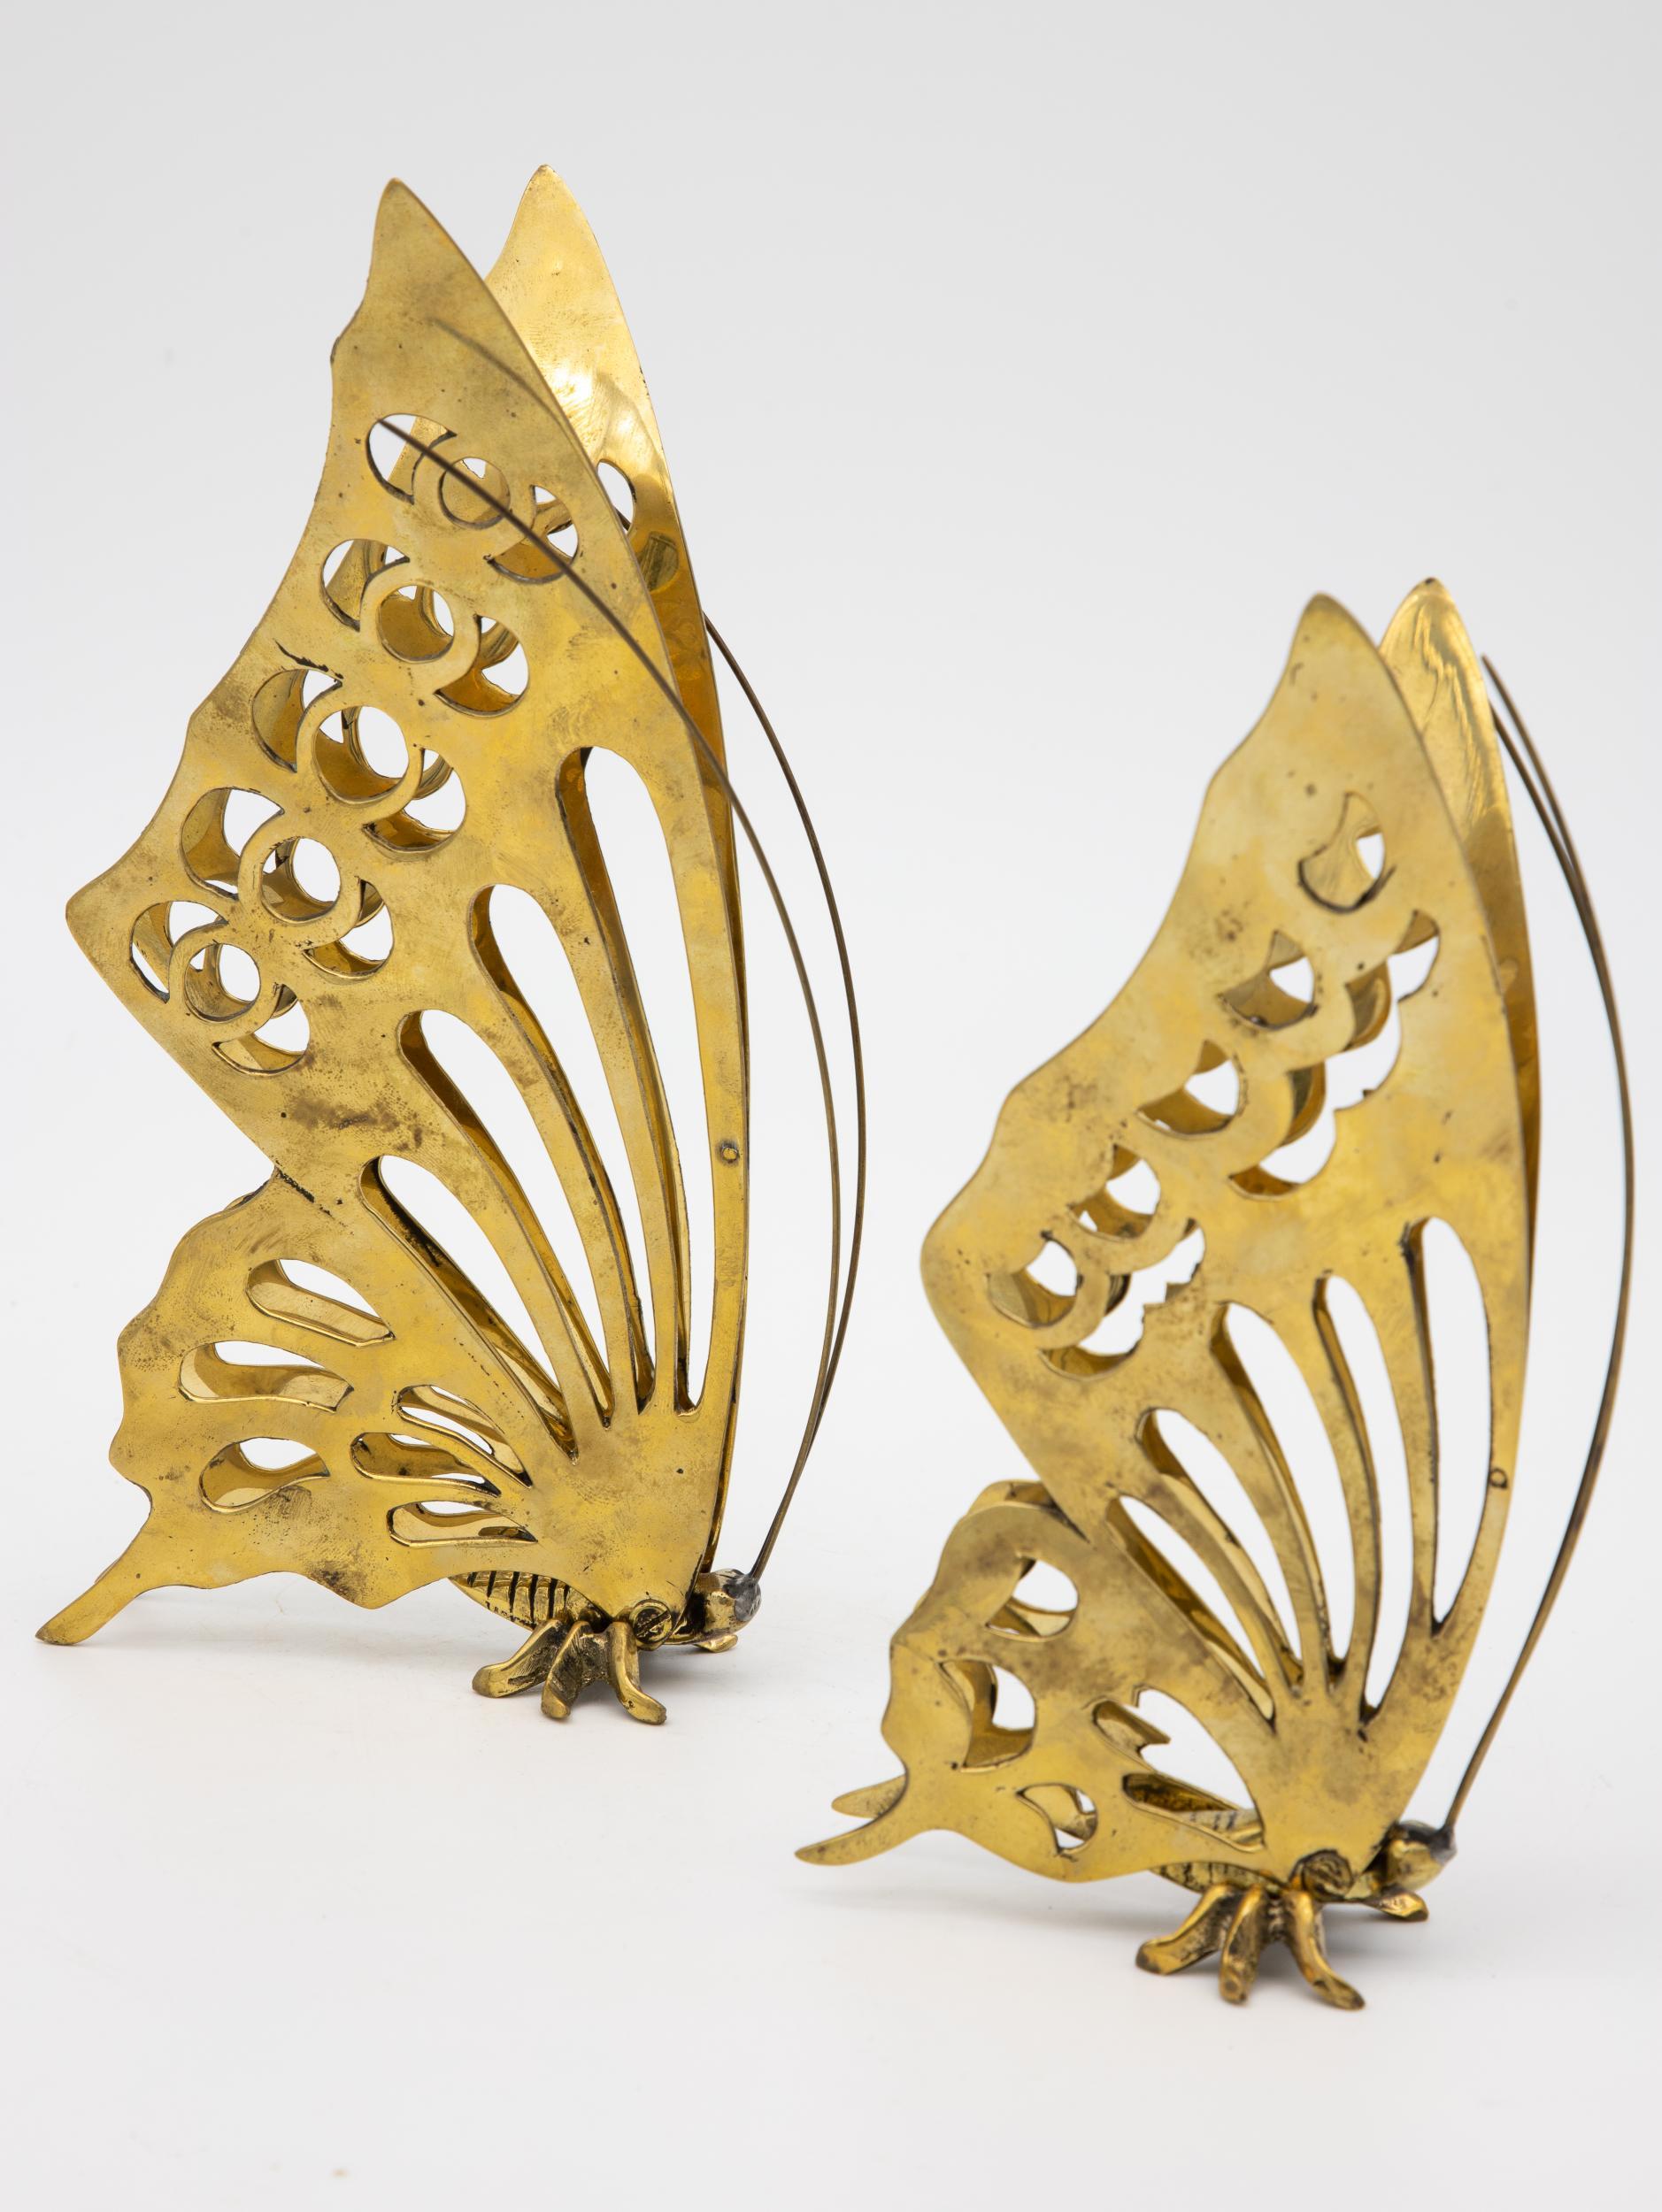 A pair of decorative brass butterflies, one slightly larger. Late 20th century. Small measures 7